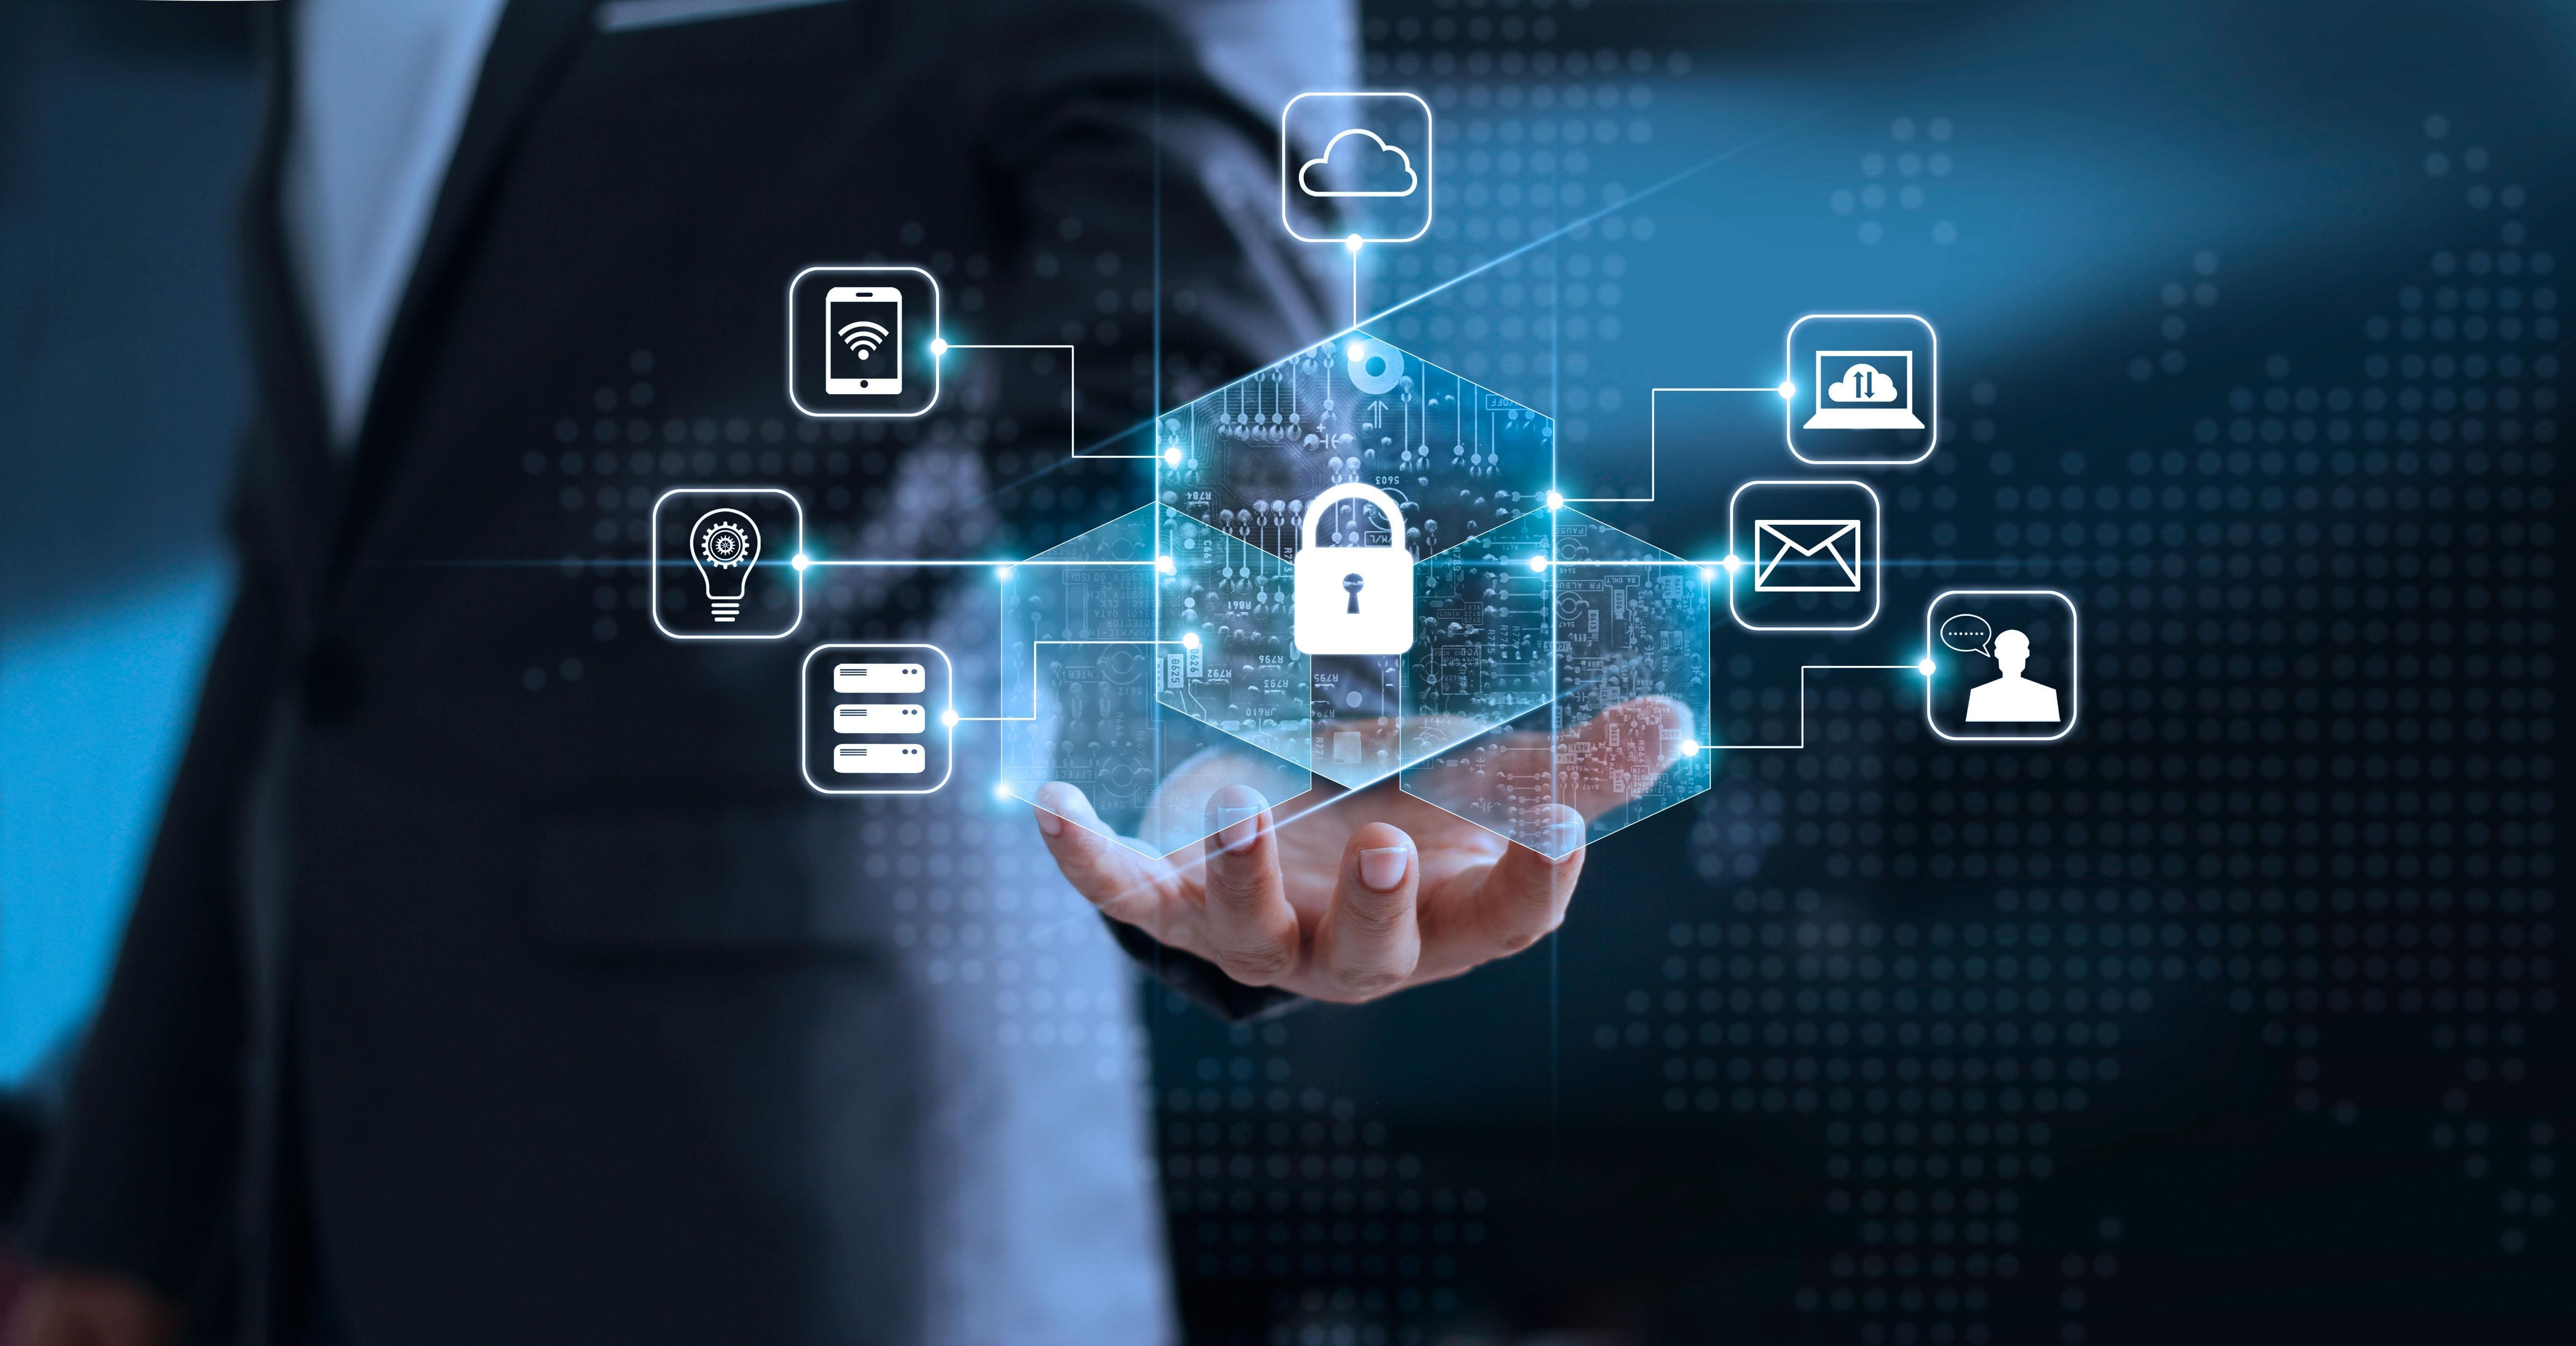 Businessman holding a digital padlock surrounded by icons representing data security and IT services, symbolizing the secure and cost-effective local backup solutions offered for enhanced data protection